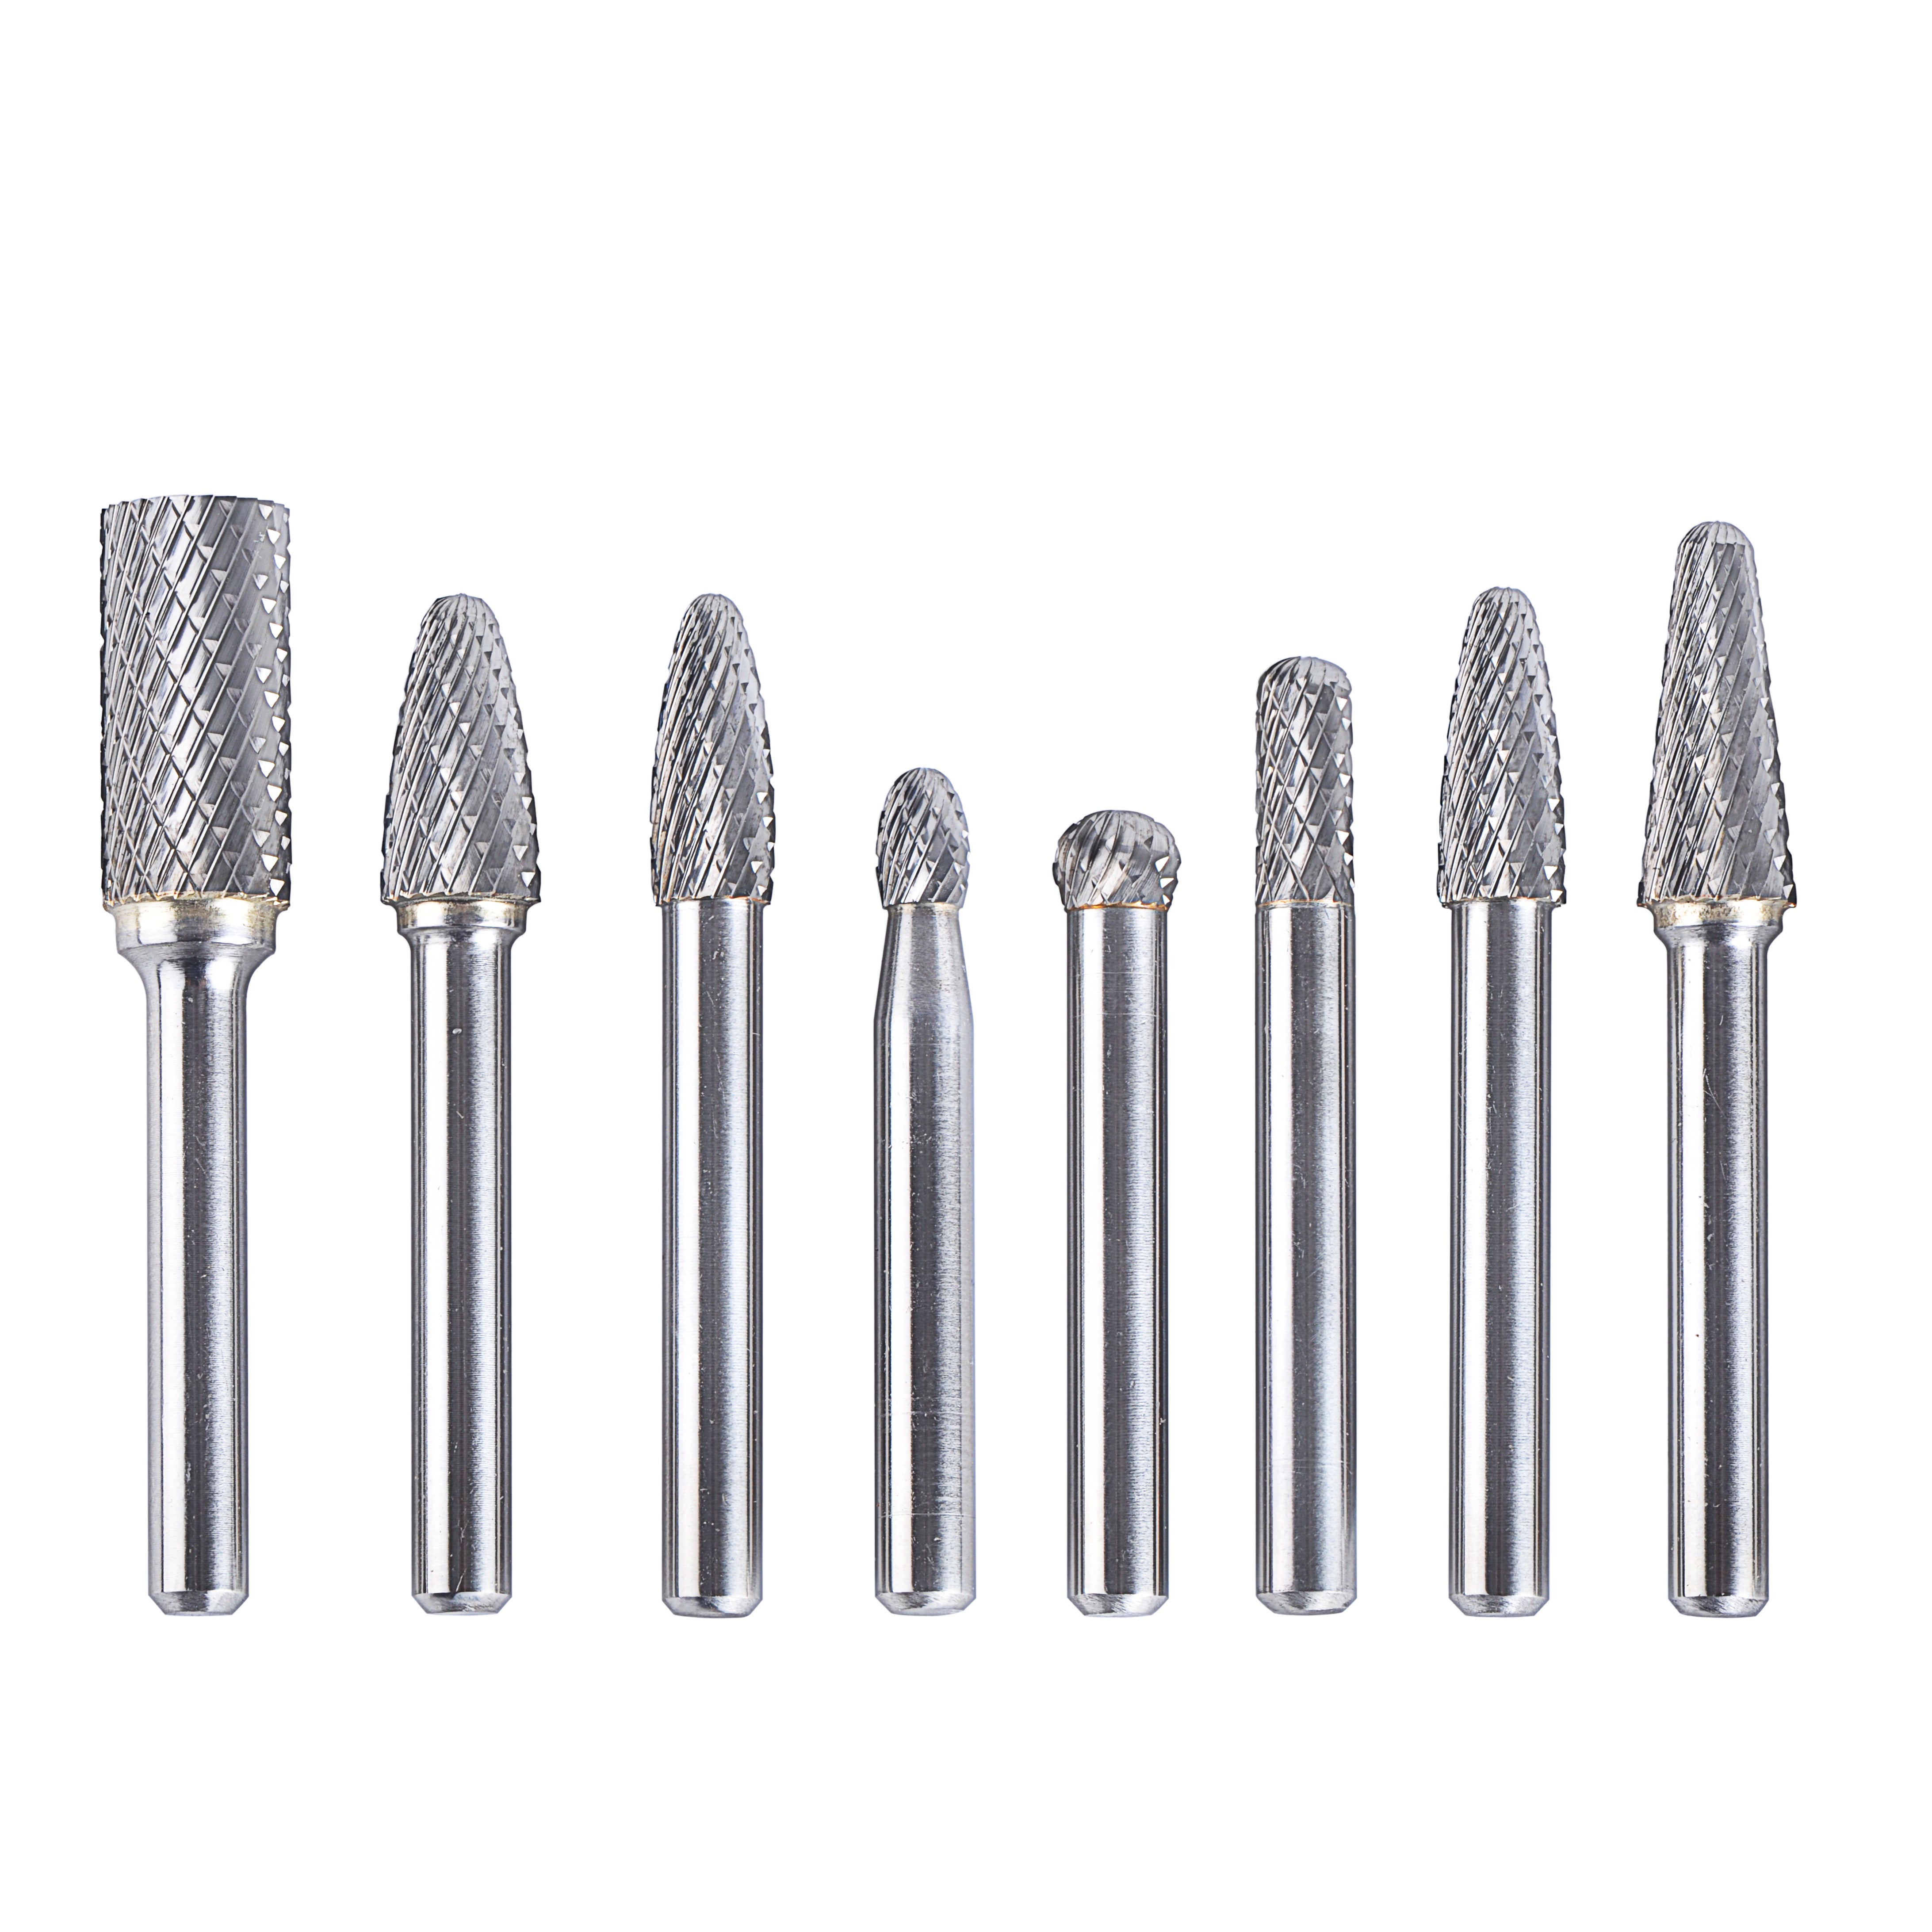 !Discontinued: SpeTool O02002 Carbide Rotary Burr Set Double Cut Die Grinder bits 1/4 inch shank 8Pcs/Pack-3